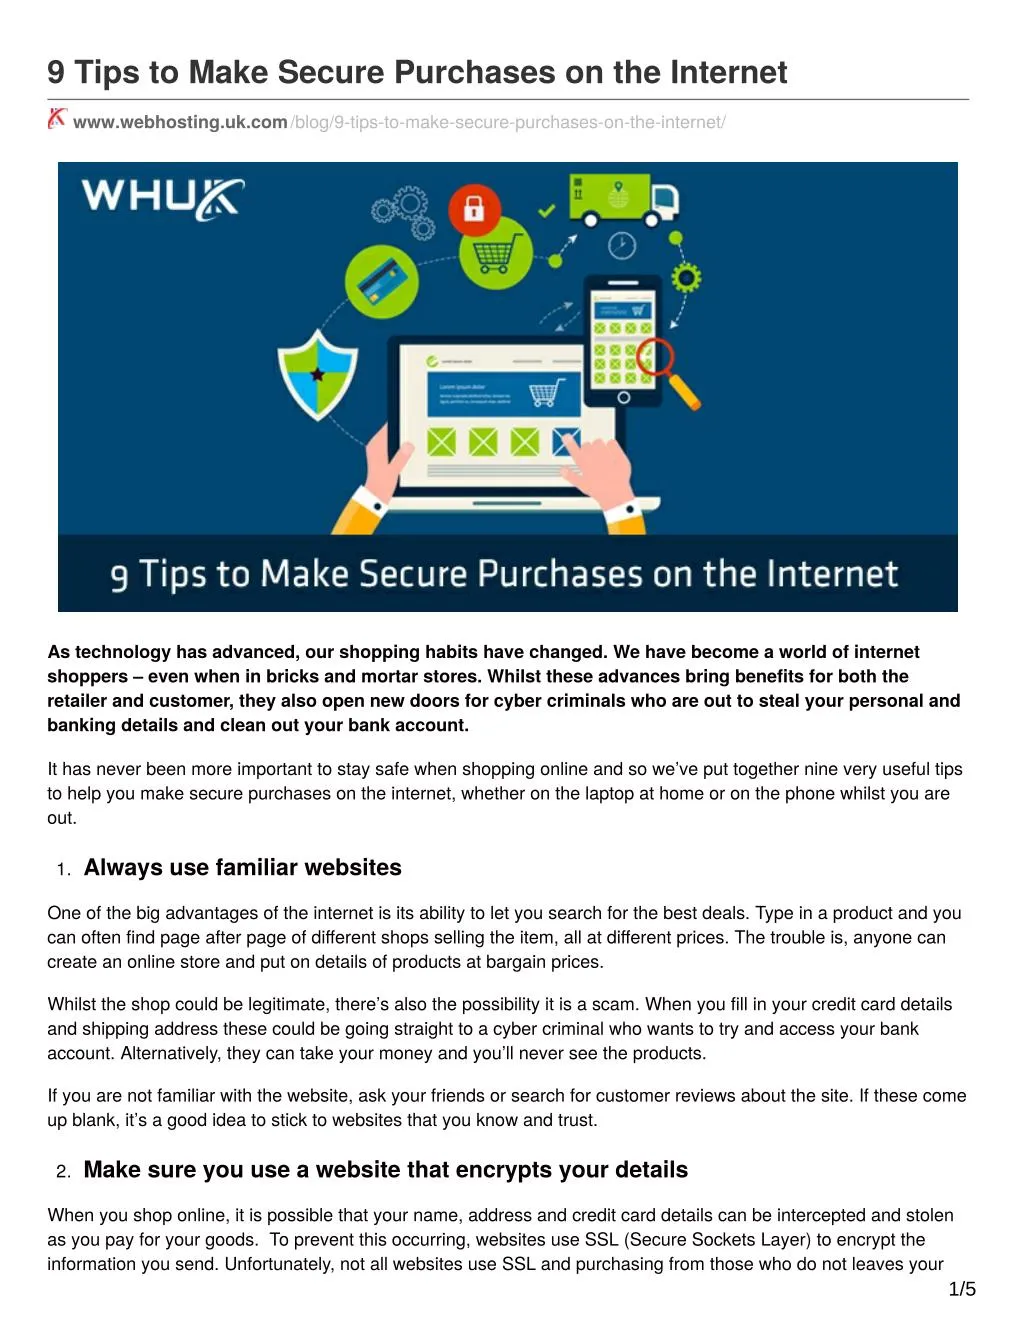 9 tips to make secure purchases on the internet